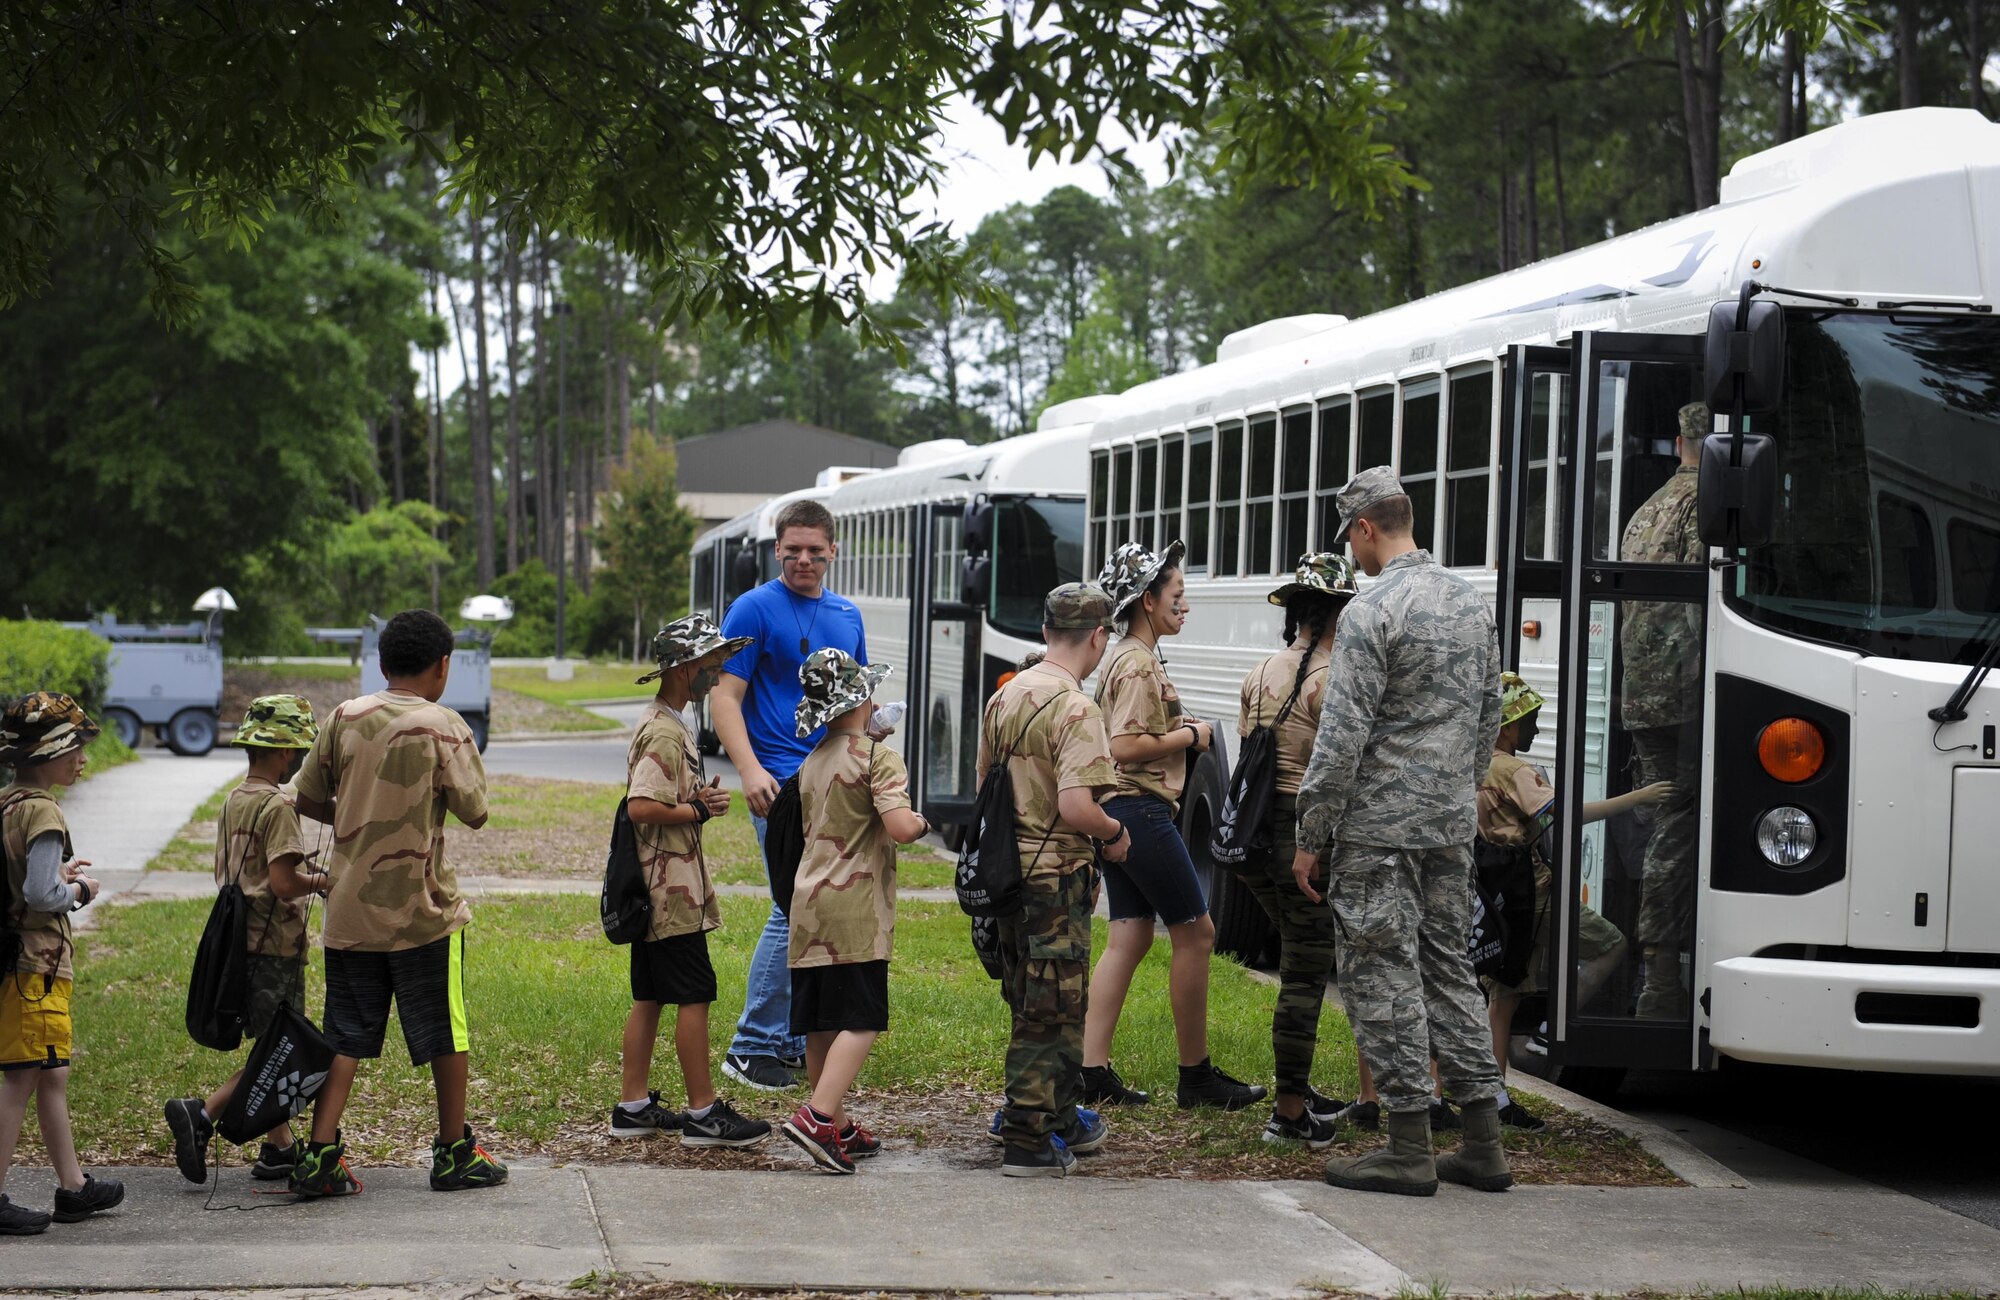 Children board a bus to travel to their “deployment zone” during Operation Kids Understanding Deployment Operations at Hurlburt Field, Fla., April 30, 2016. At the “deployment zone” children were able to explore machines and equipment from the 823rd RED HORSE squadron, the 1st Special Operations Civil Engineer Squadron fire department and the 1st Special Operations Medical Group. They also watched demonstrations from the 1st Special Operations Security Forces Squadron. (U.S. Air Force photo by Senior Airman Meagan Schutter)